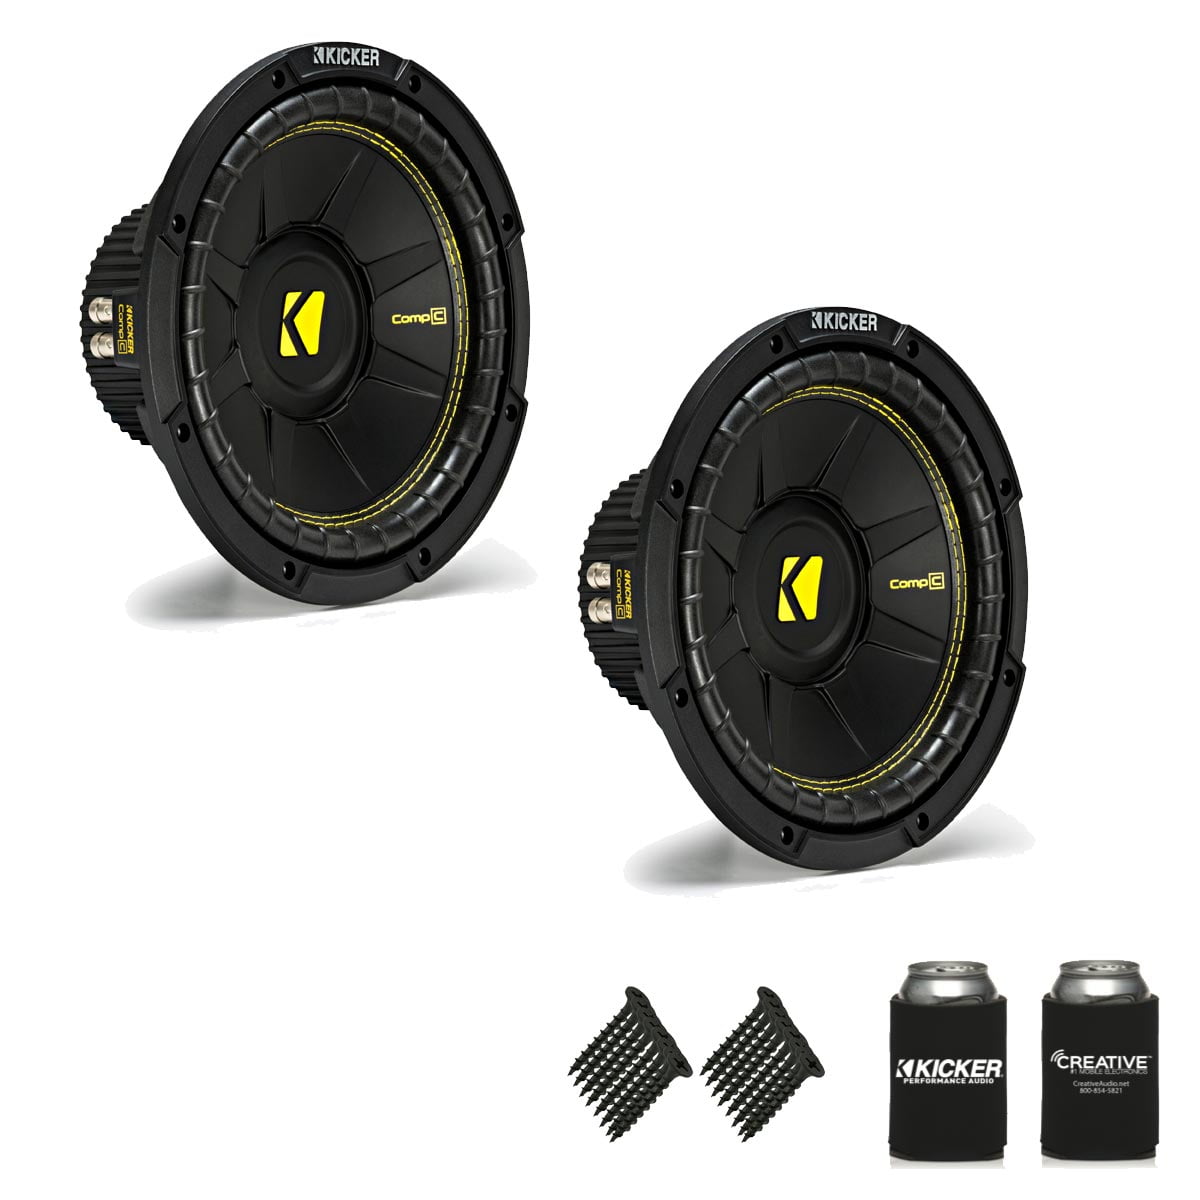 KICKER 44CWCD104 CompC 10 1000w Dual 4-Ohm Car Audio Subwoofers Subs CWCD104 2 